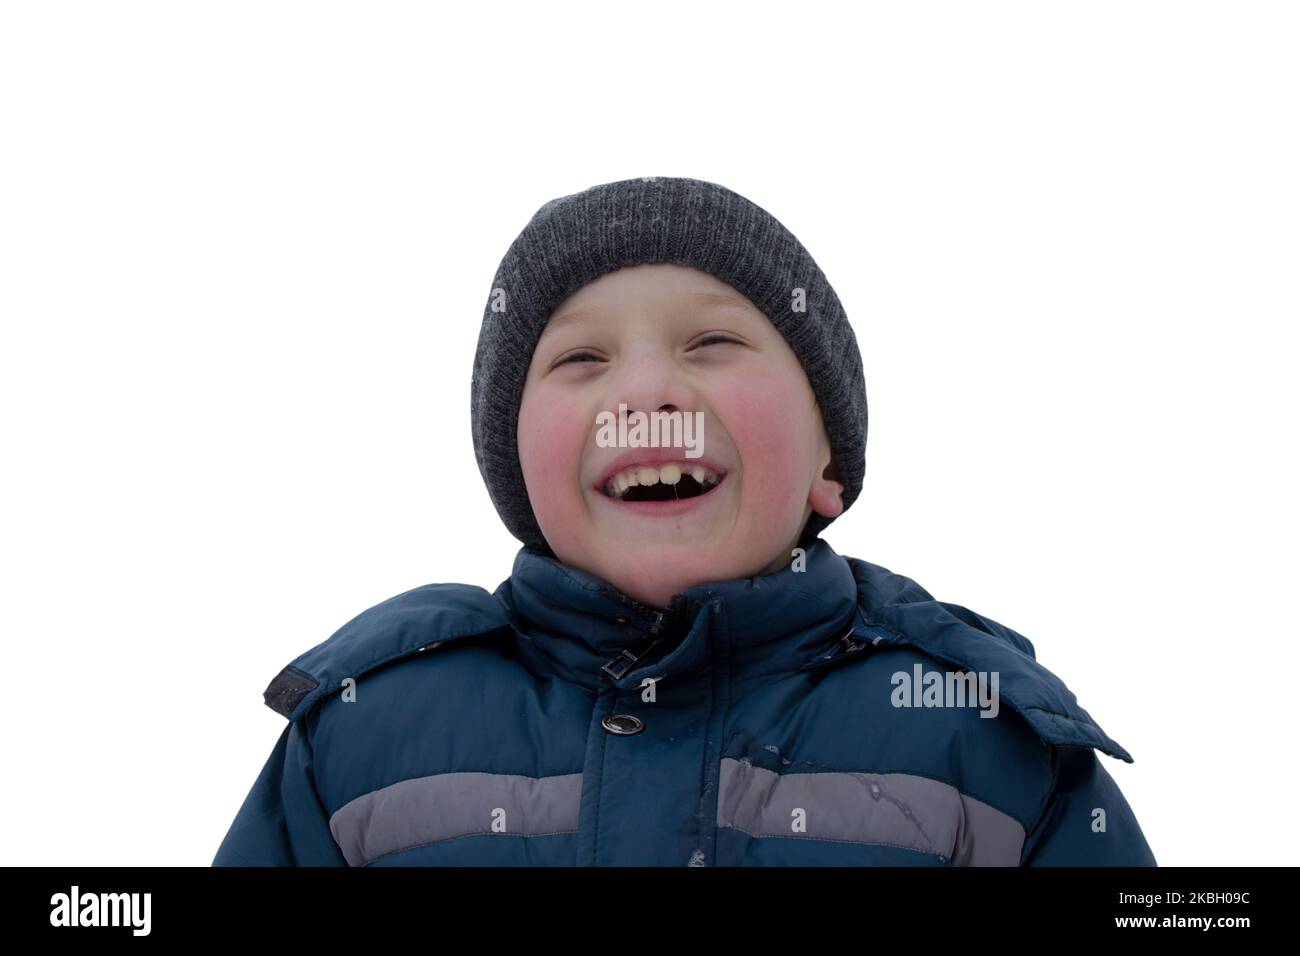 boy laughing on white background winter clothes Stock Photo